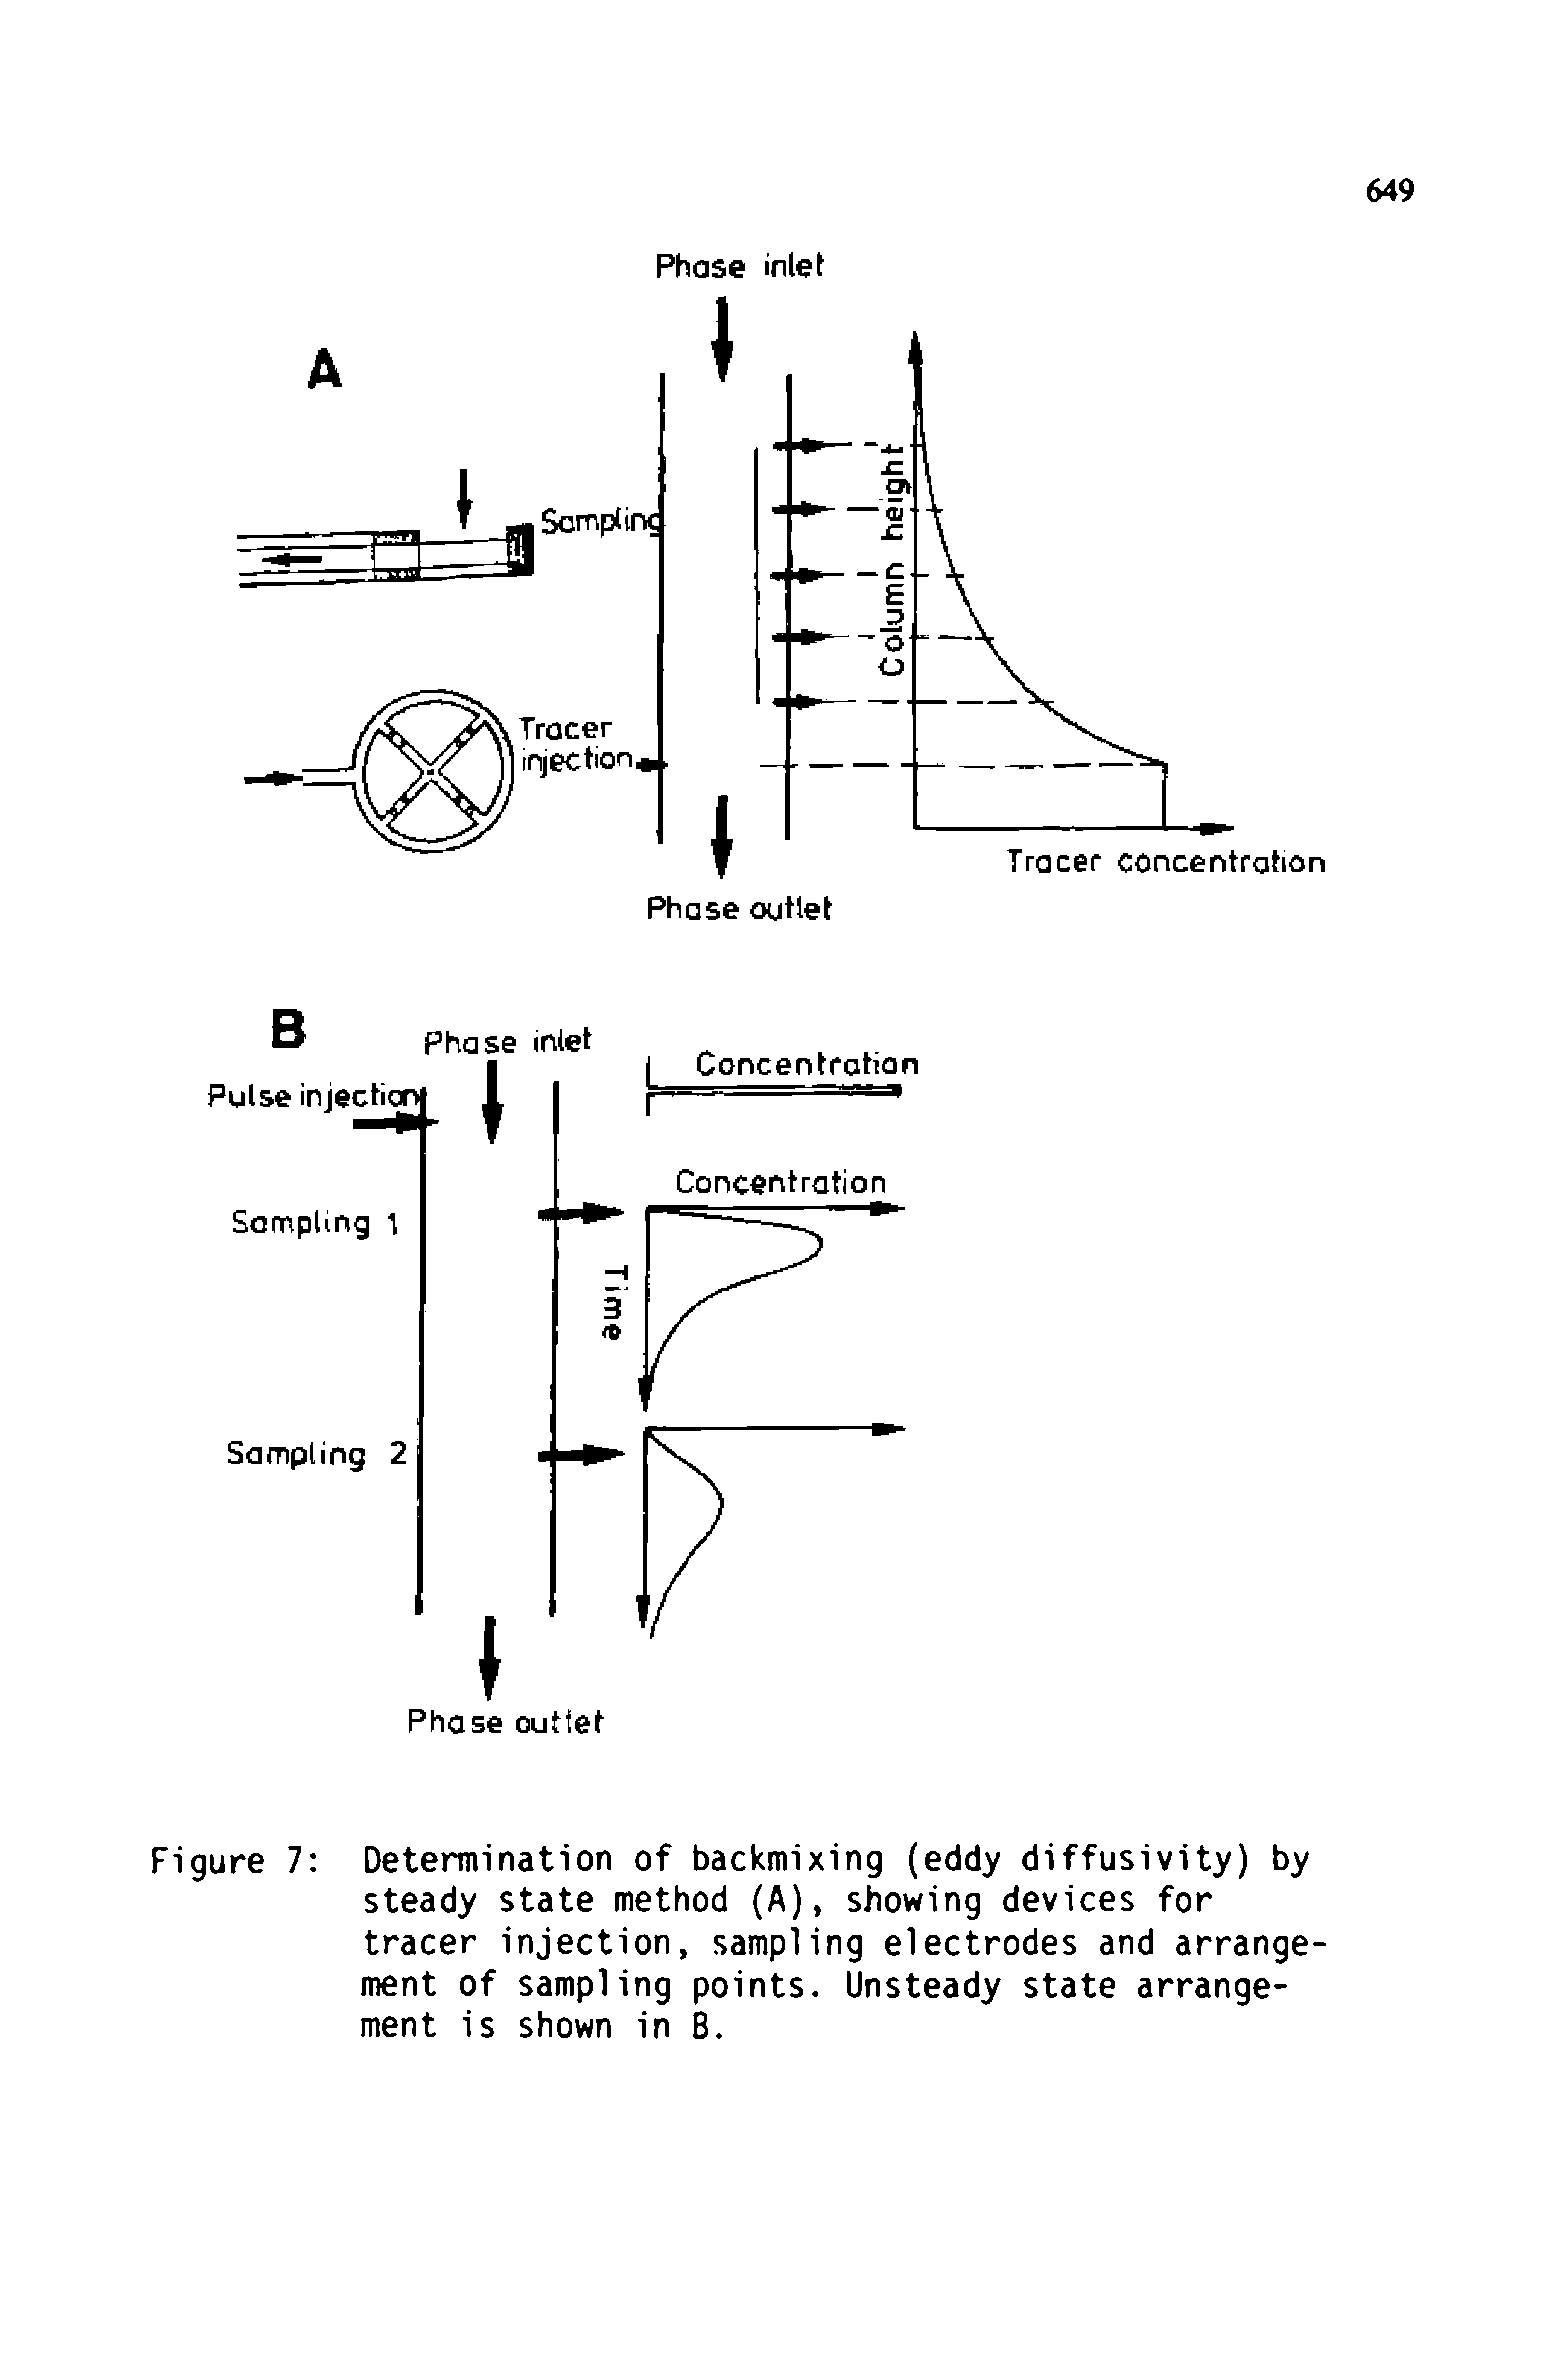 Figure 7 Determination of backmixing (eddy diffusivity) by steady state method (A), showing devices for tracer injection, sampling electrodes and arrangement of sampling points. Unsteady state arrangement is shown in B.